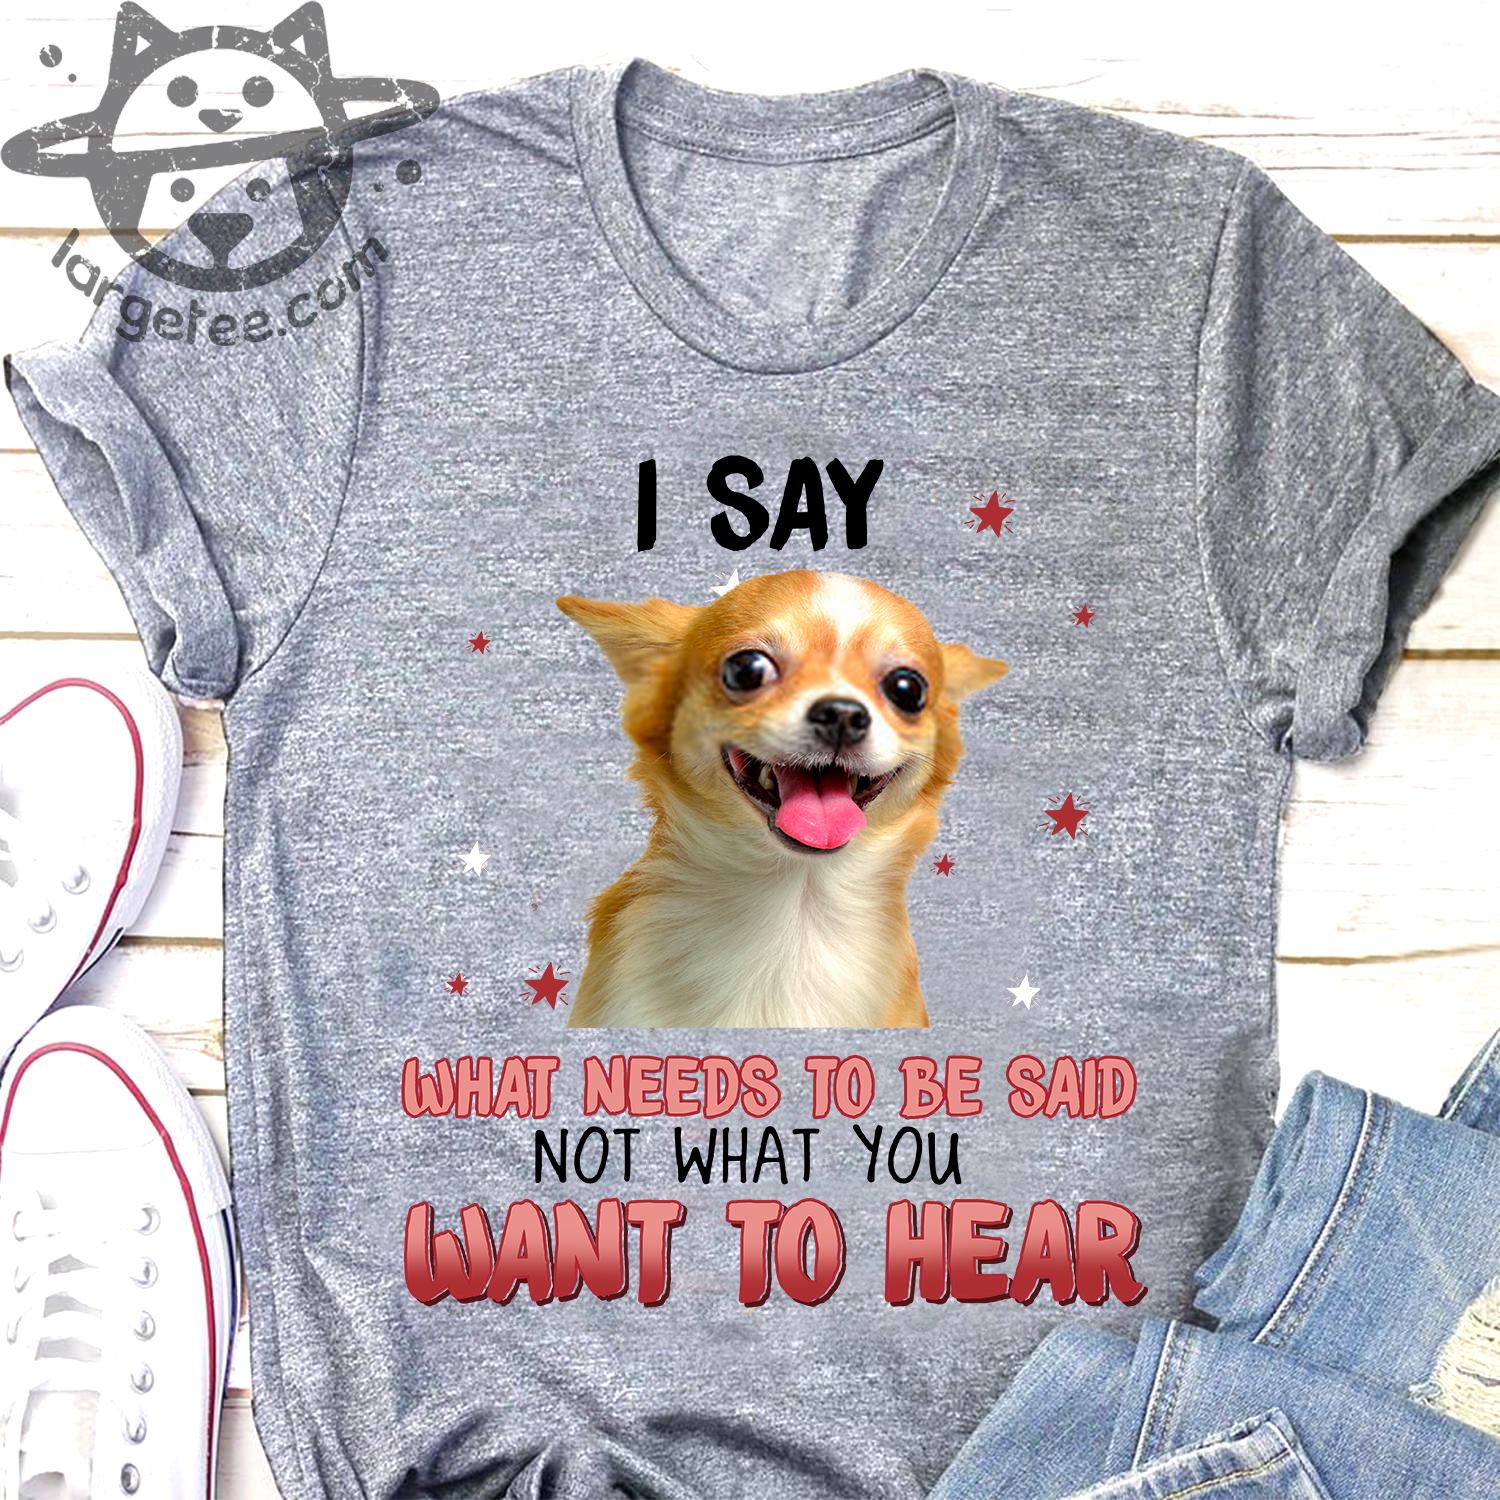 I say what needs to be said not what you want to hear - Chihuahua dog